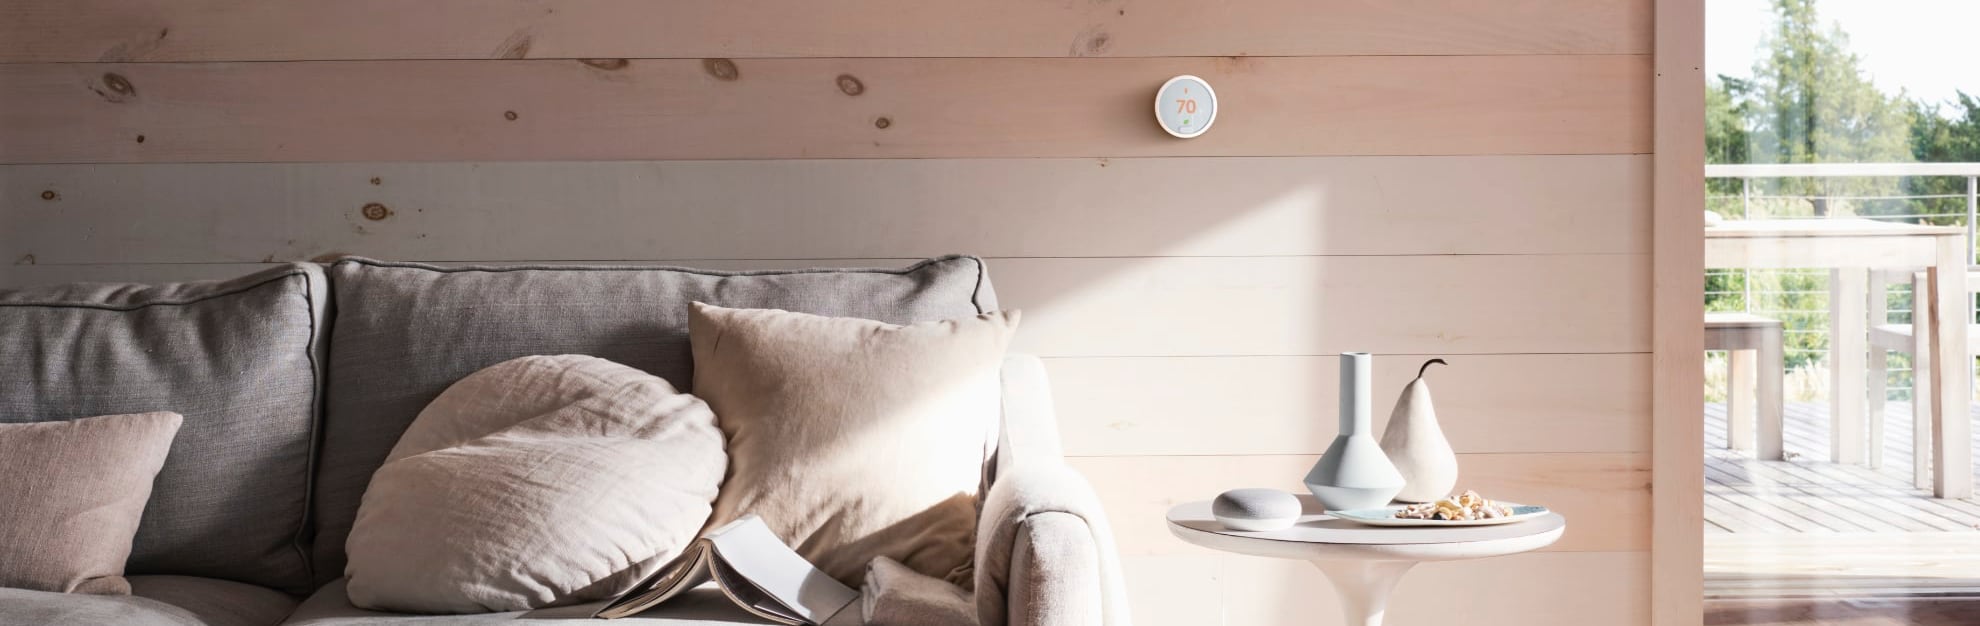 Vivint Home Automation in Beaumont